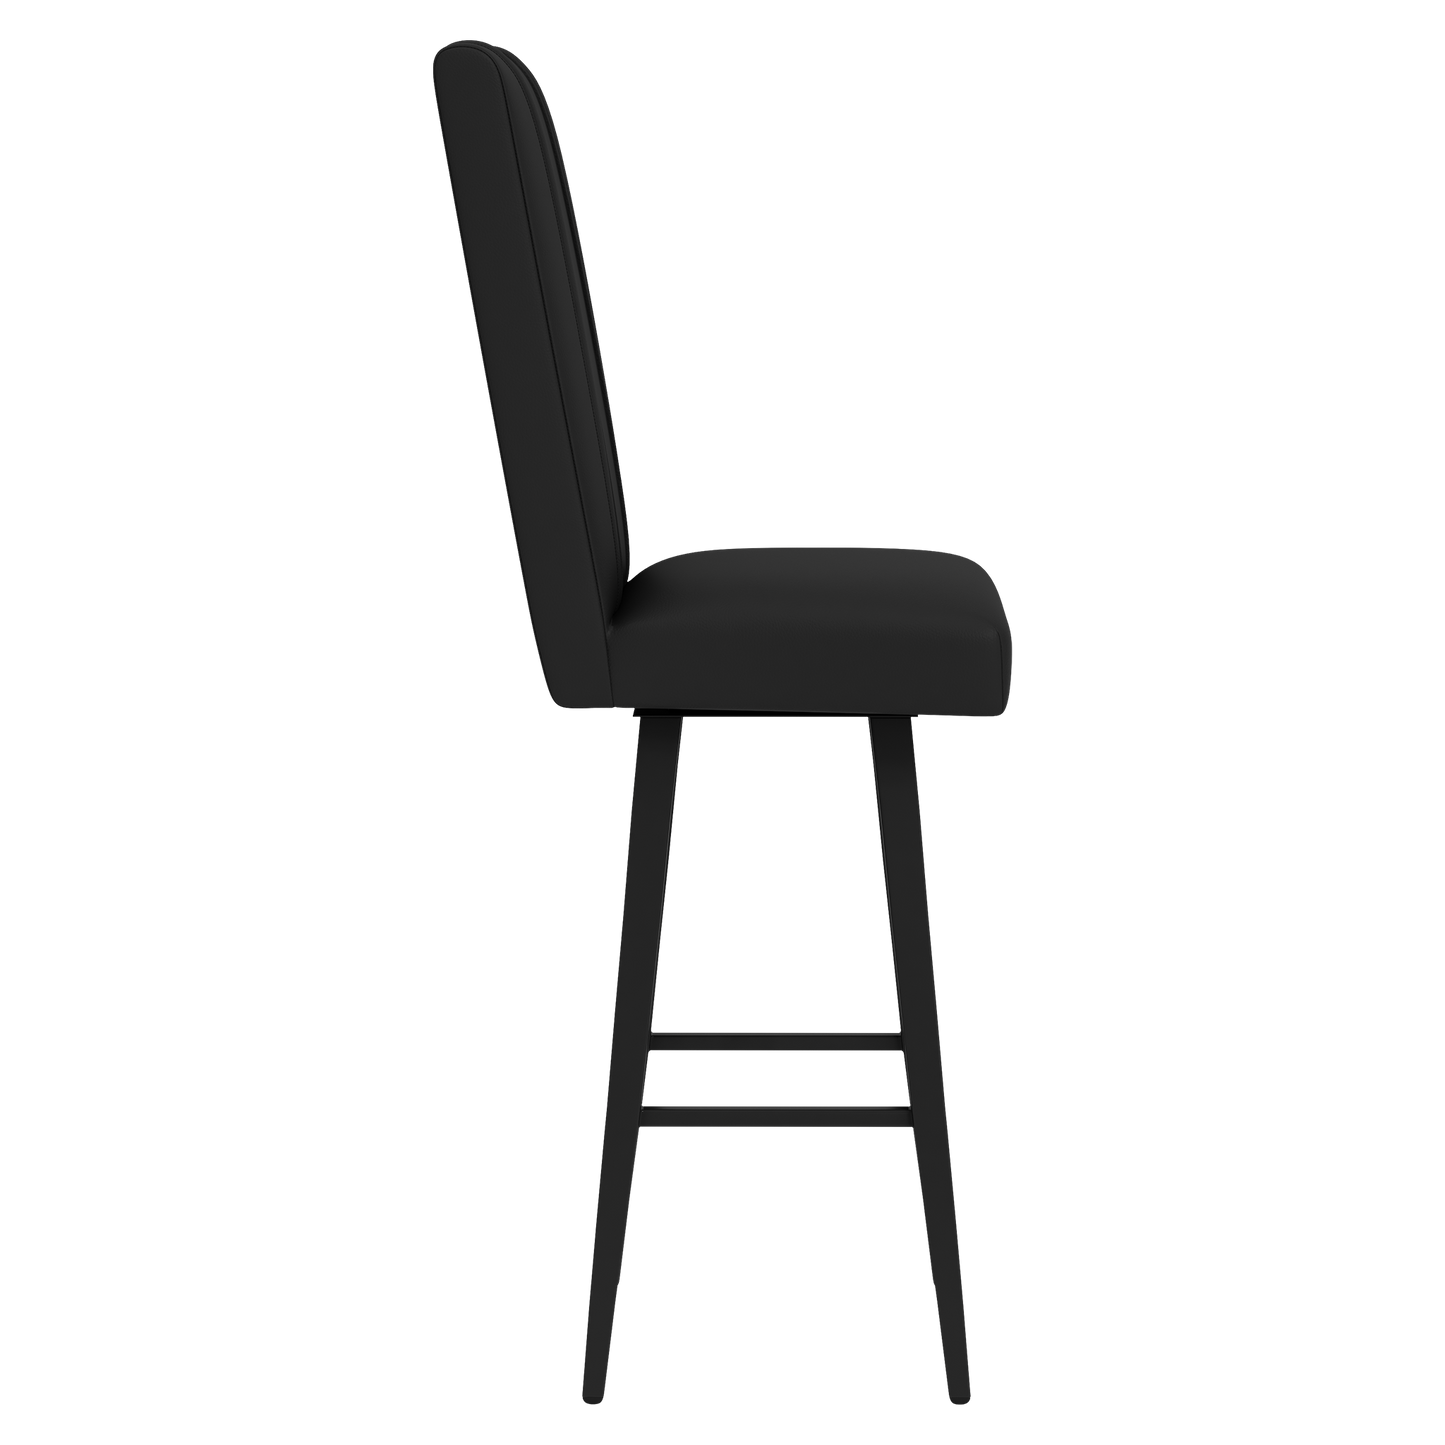 Swivel Bar Stool 2000 with Chicago Cubs Secondary